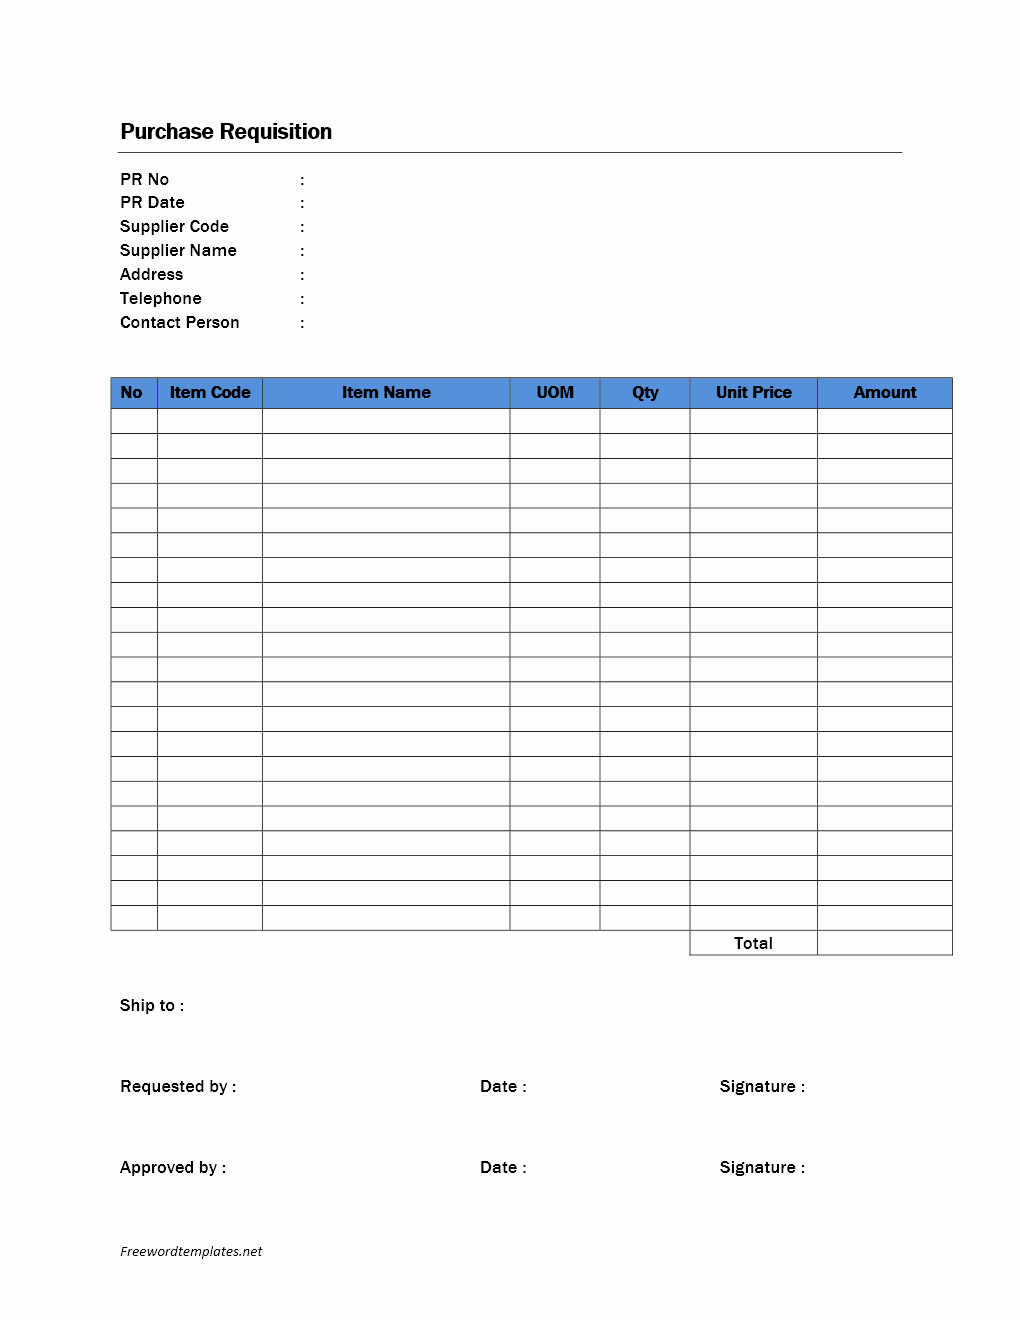 Purchase order Template Word Awesome Purchase Requisition form